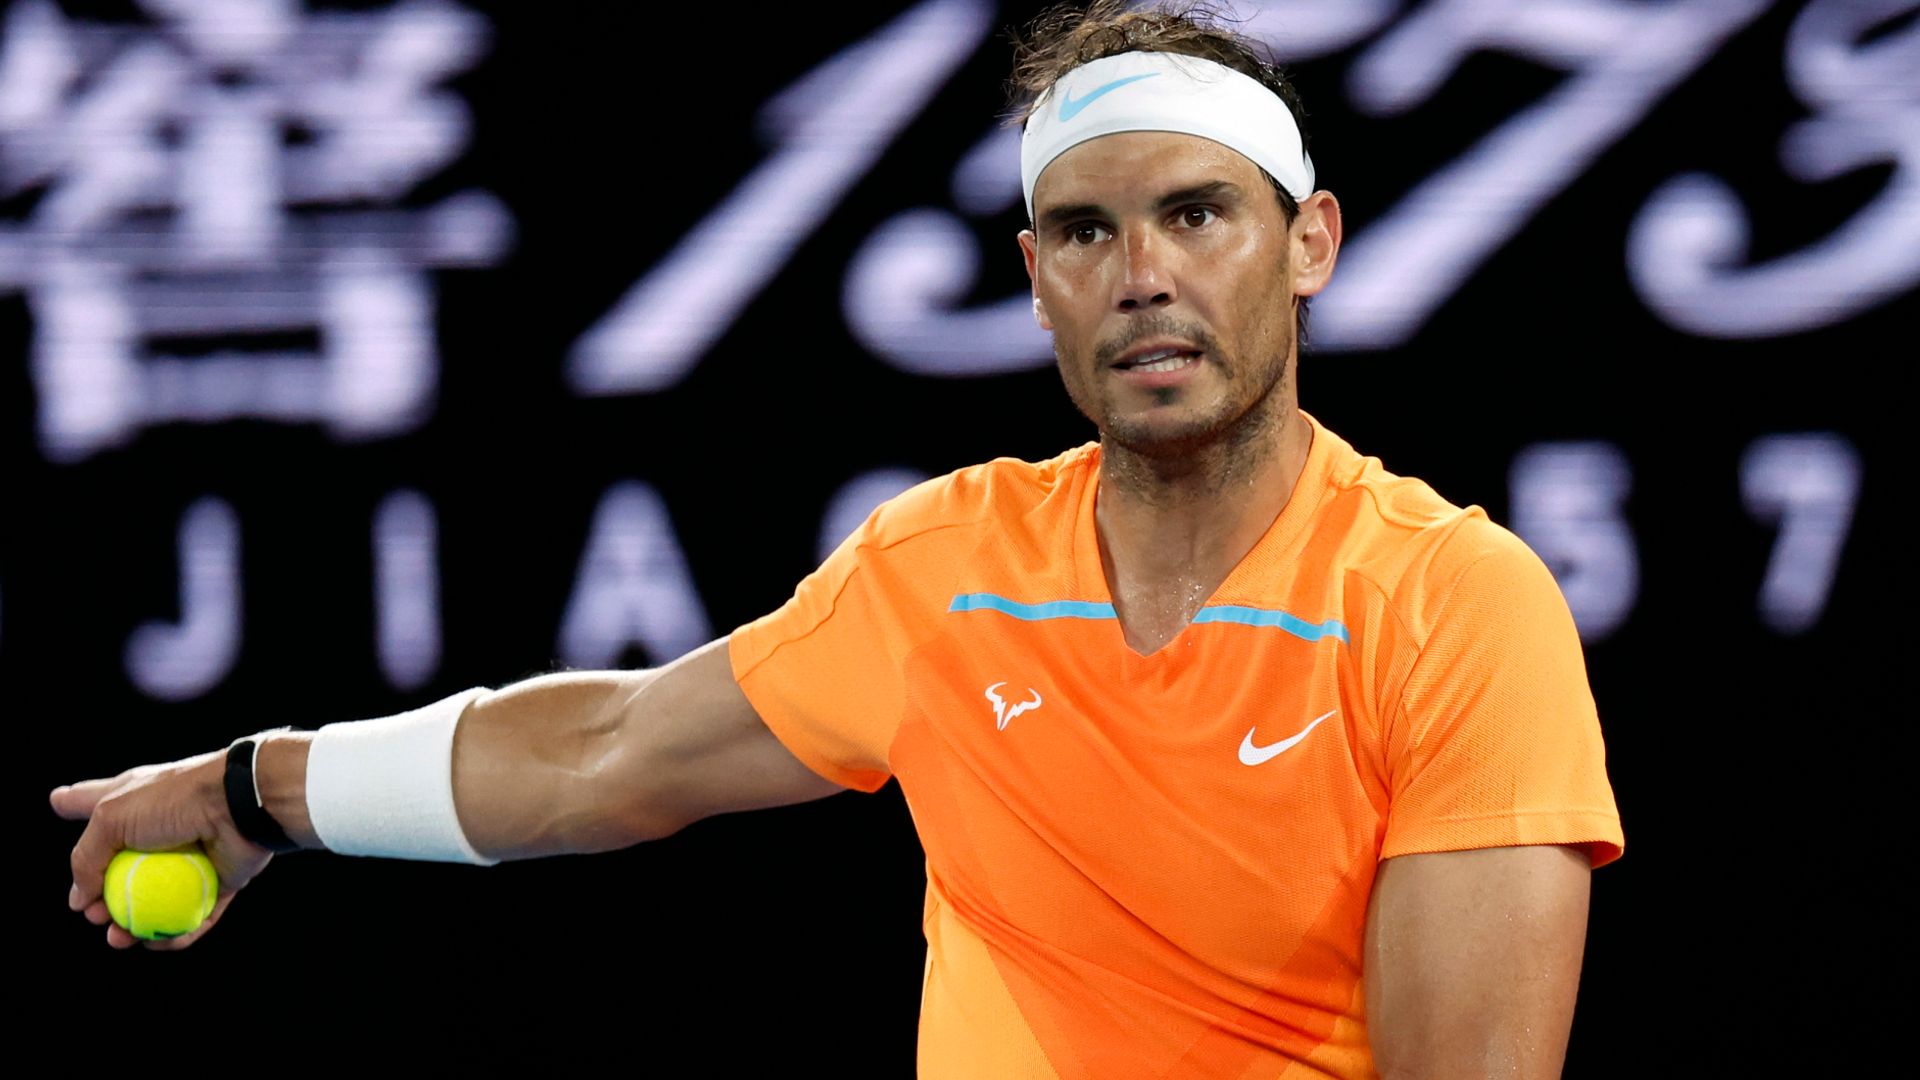 Australian Open LIVE! Defending champion Nadal knocked out by McDonald